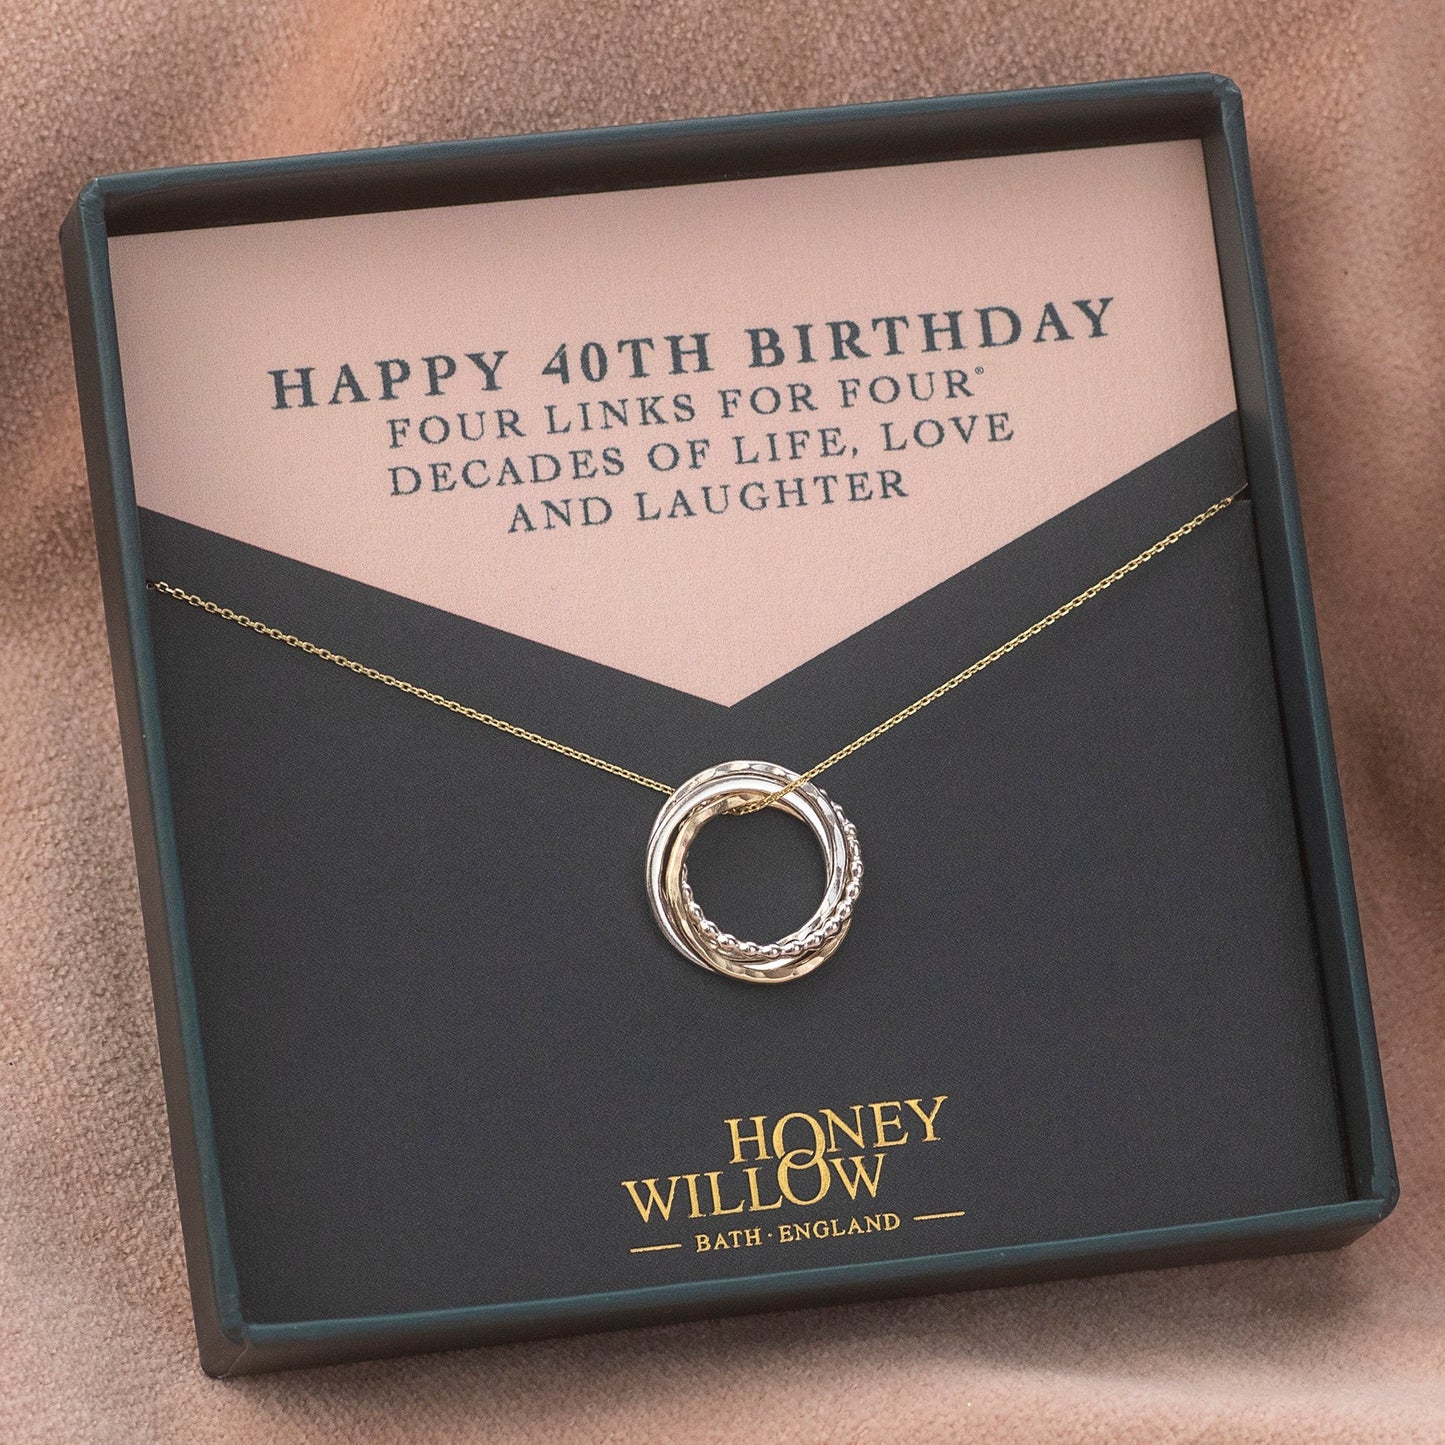 40th Birthday Necklace - Silver & 9kt Gold - The Original 4 Links for 4 Decades Necklace